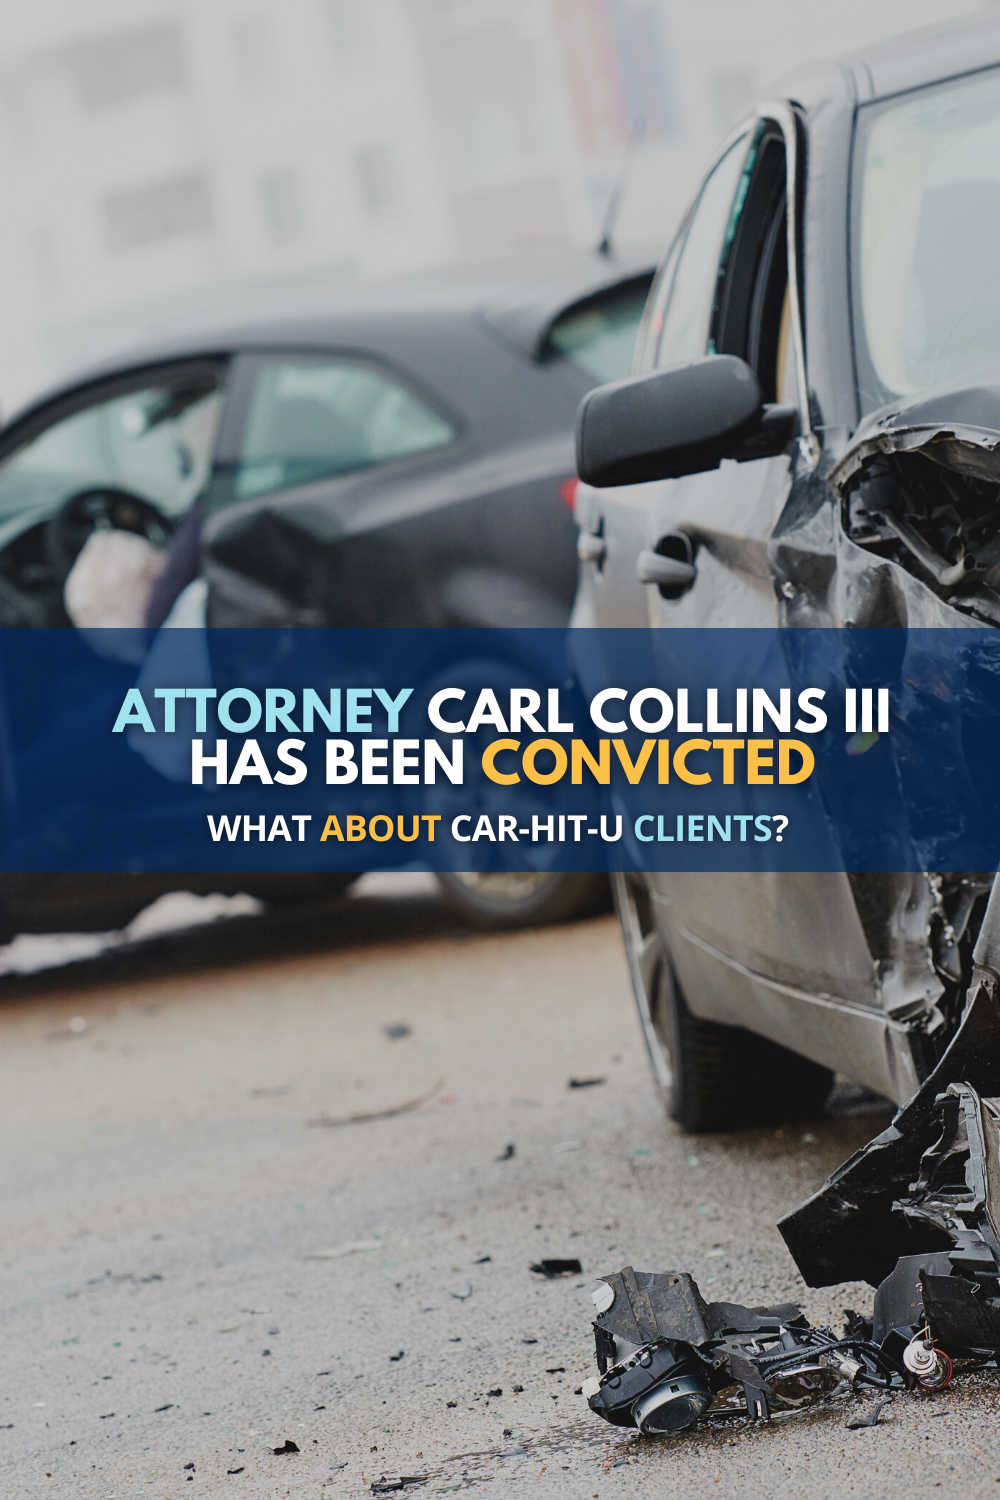 Attorney Carl Collins III Convicted of Tax Fraud: What Happens To The “855-CAR-HIT-U” Clients